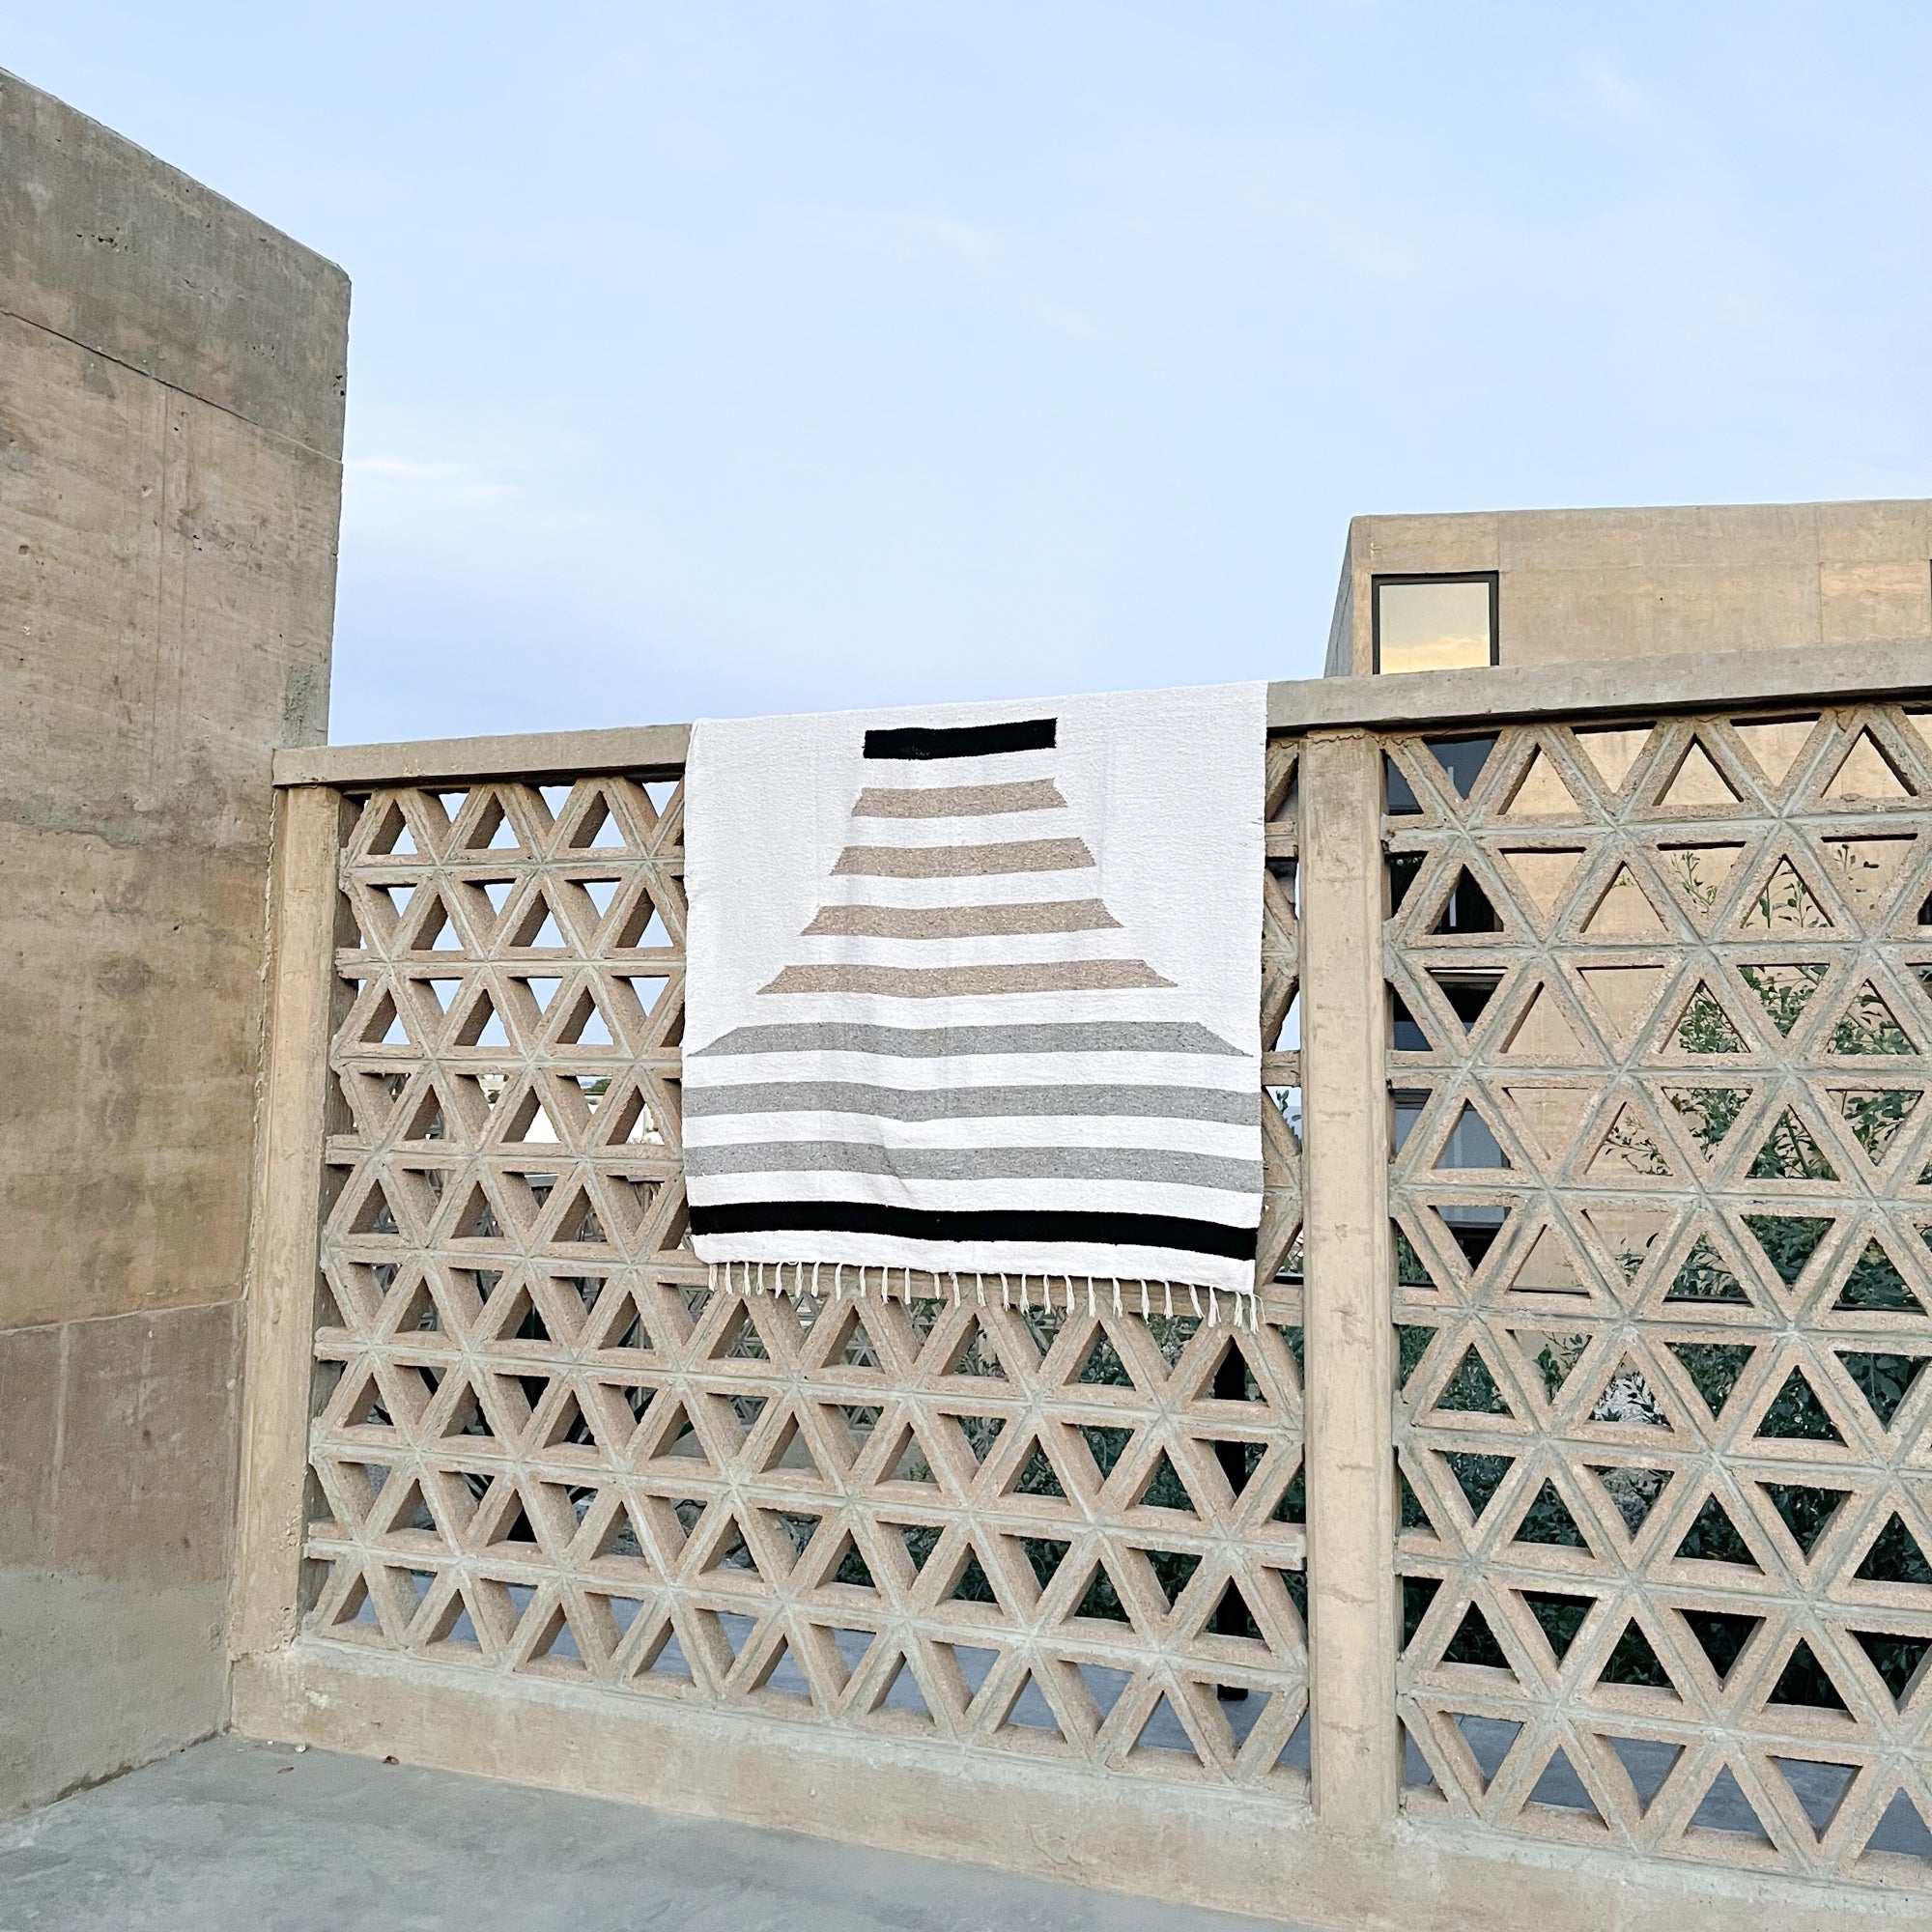 A Mexican beach blanket draped over the edge of a brick geometric fence in Baja.